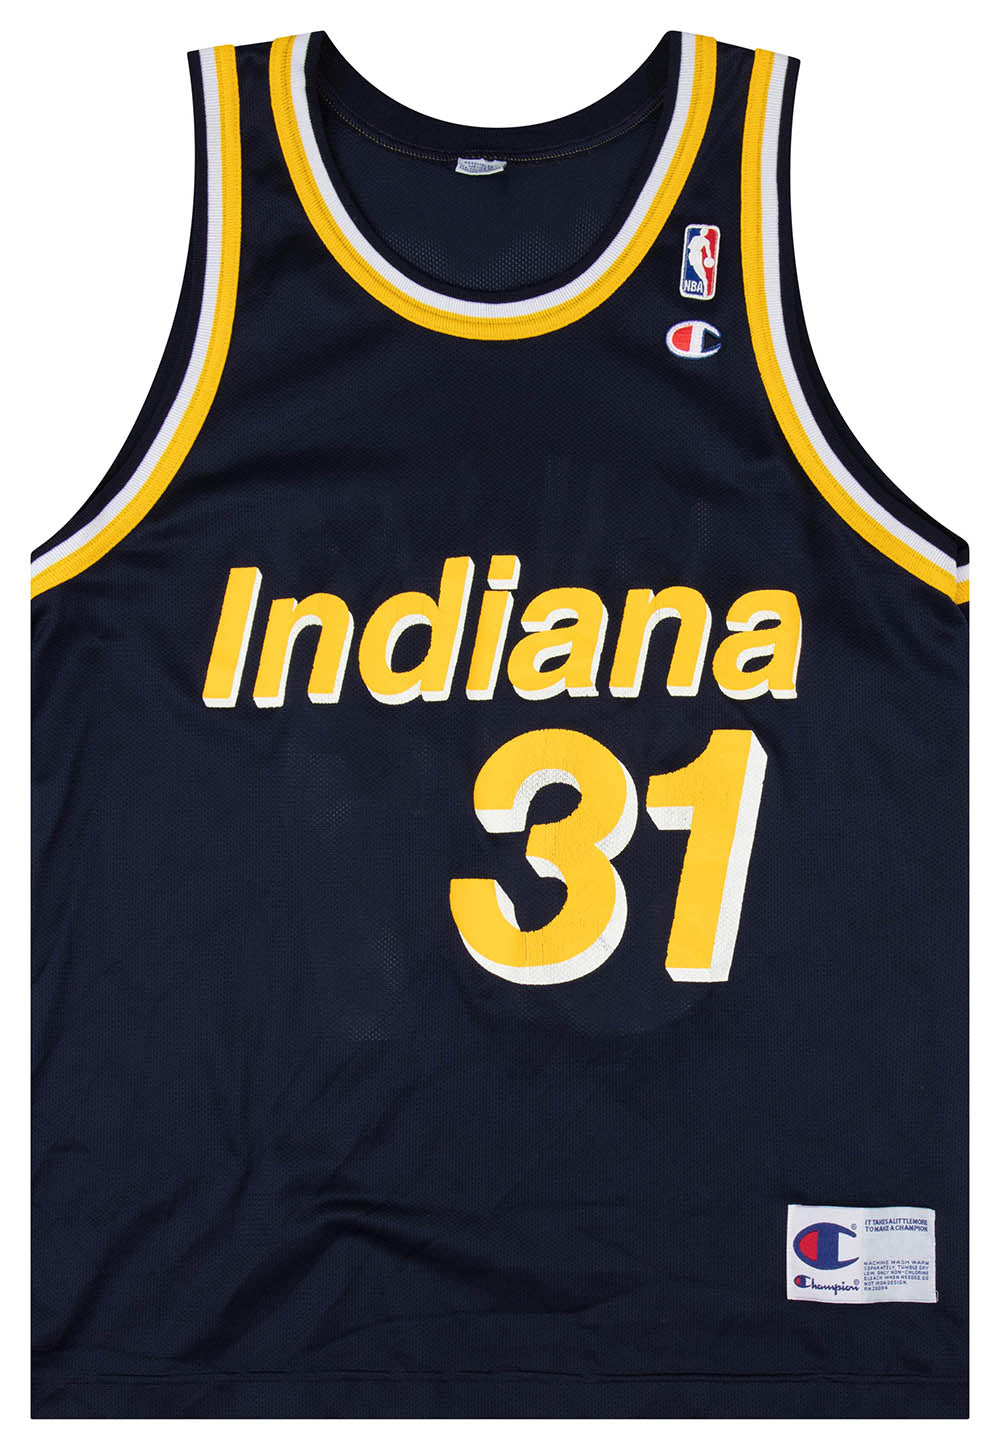 1995-97 INDIANA PACERS MILLER #31 CHAMPION JERSEY (AWAY) L